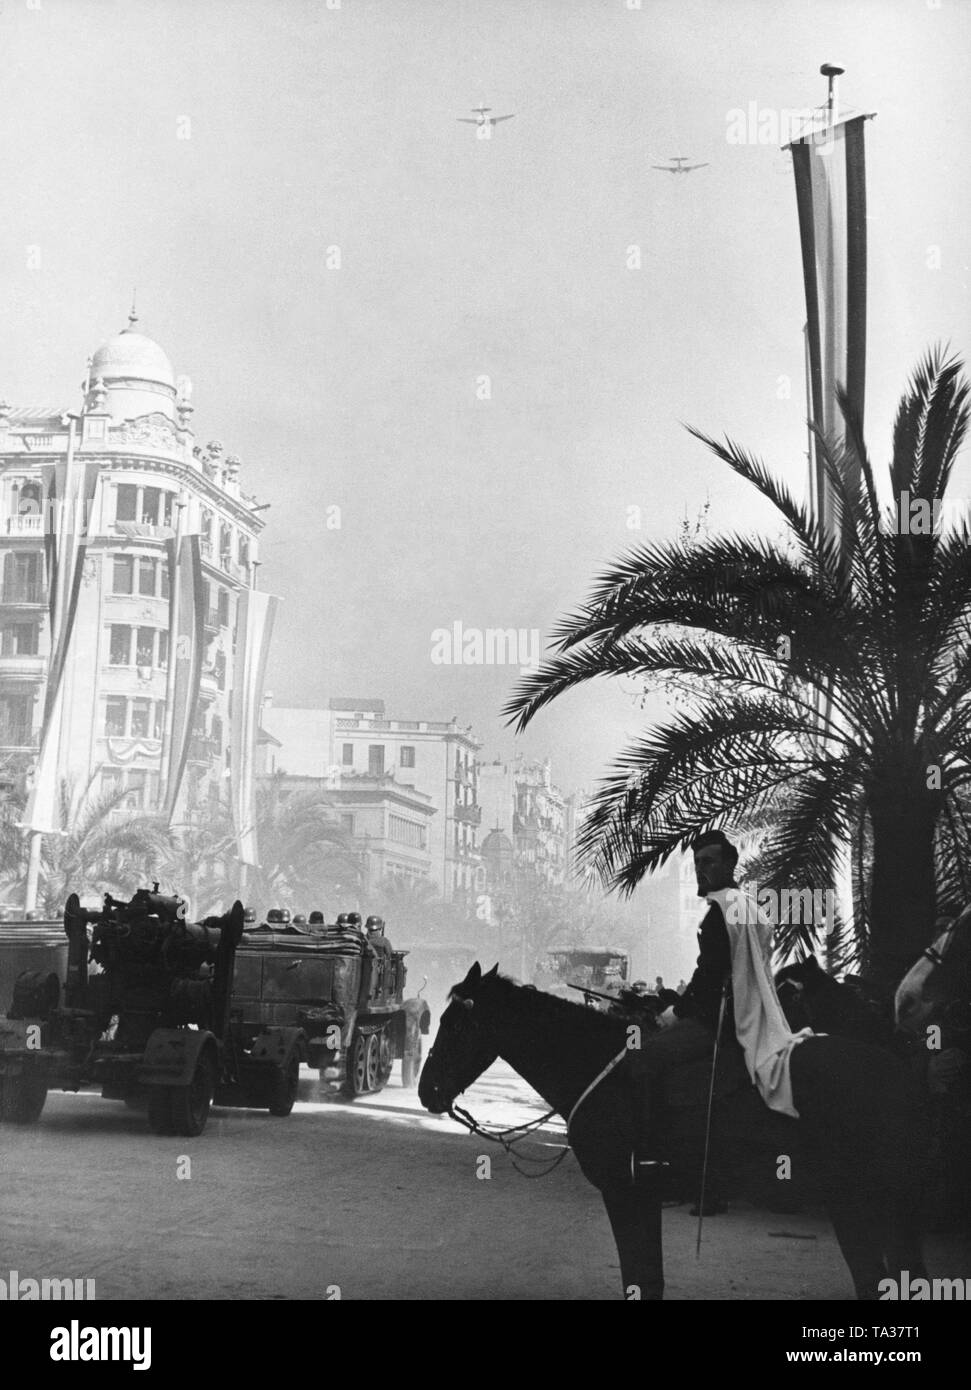 Photo of a victory parade of Spanish national units in Passeig de Colon after the conquest (January 1939) of Barcelona by General Francisco Franco in February, 1939. A German artillery procession of the Condor Legion is passing by. The 8.8cm FLAK 36 (two-axle mount) is carried by a heavy half-track vehicle, type 8 and 9. In the sky, formation flight of the German Condor Legion. Stock Photo